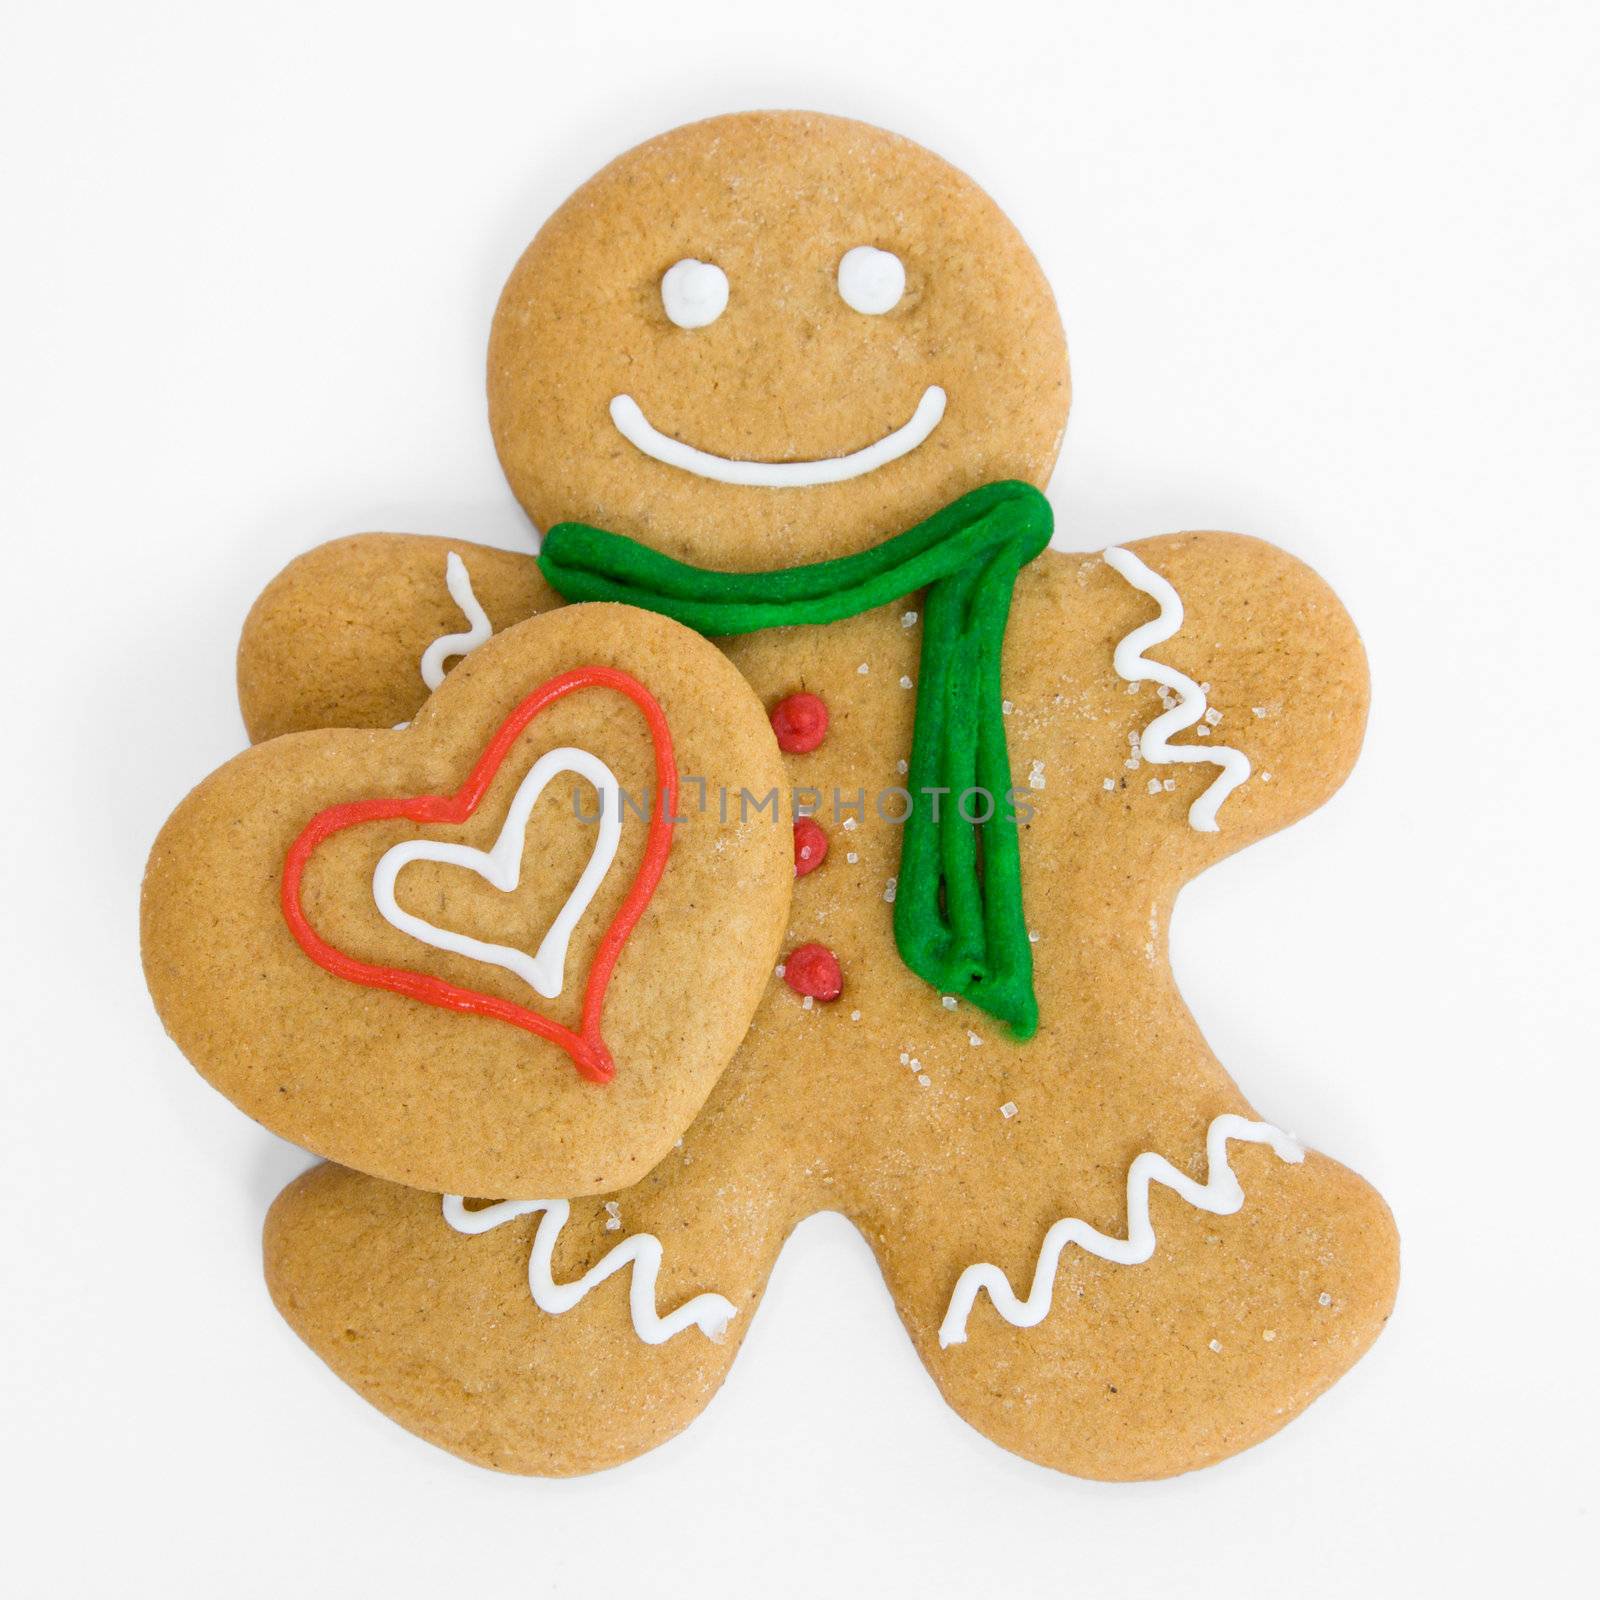 Gingerbread man with gingerbread heart by RuthBlack